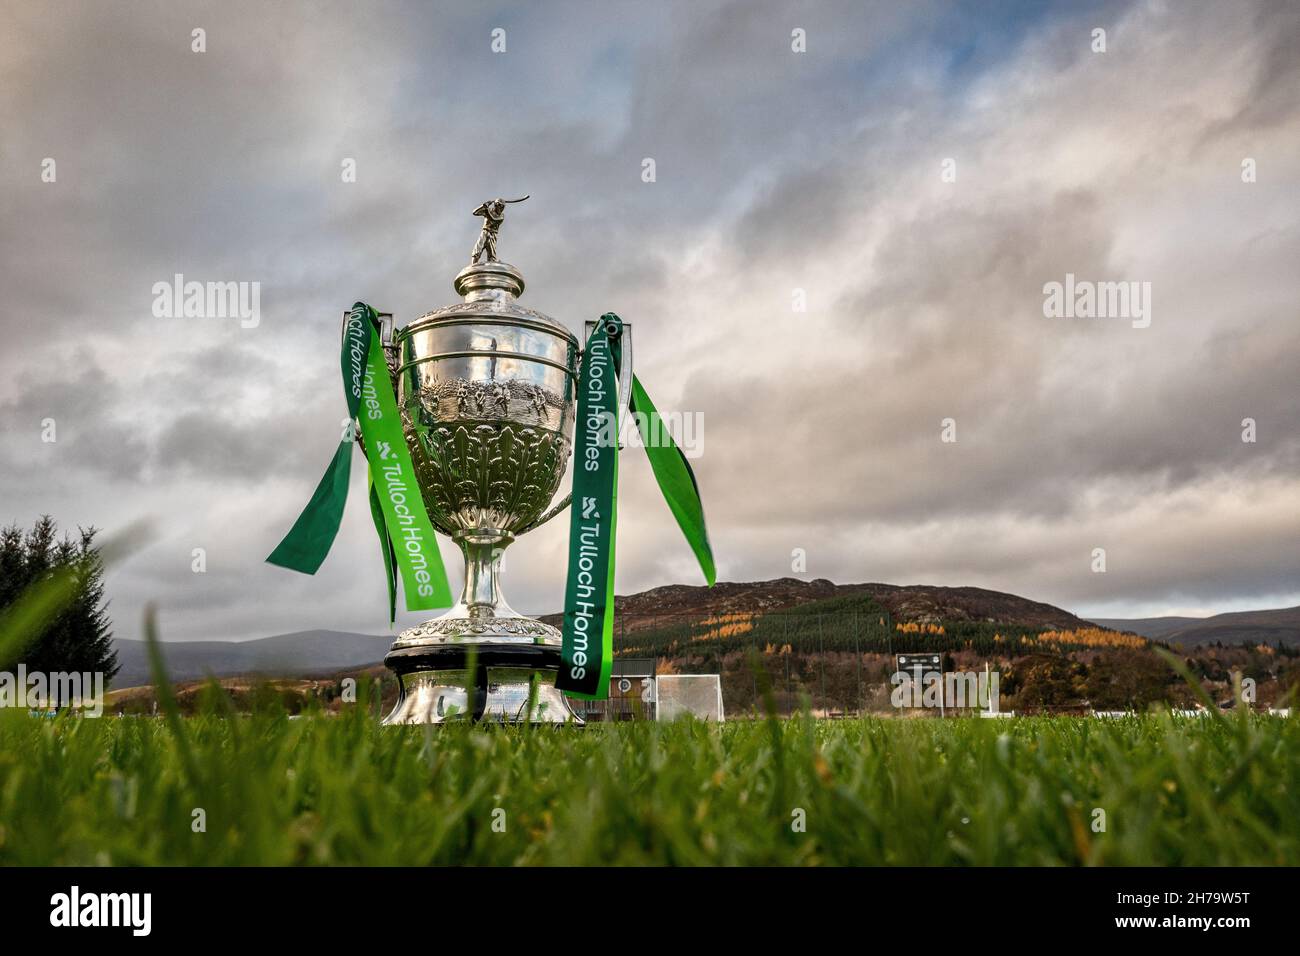 The most important trophy in shinty, the Camanachd Cup pictured on the pitch at The Dell, Kingussie, with the sponsors ribbons showing Tulloch Homes. Stock Photo